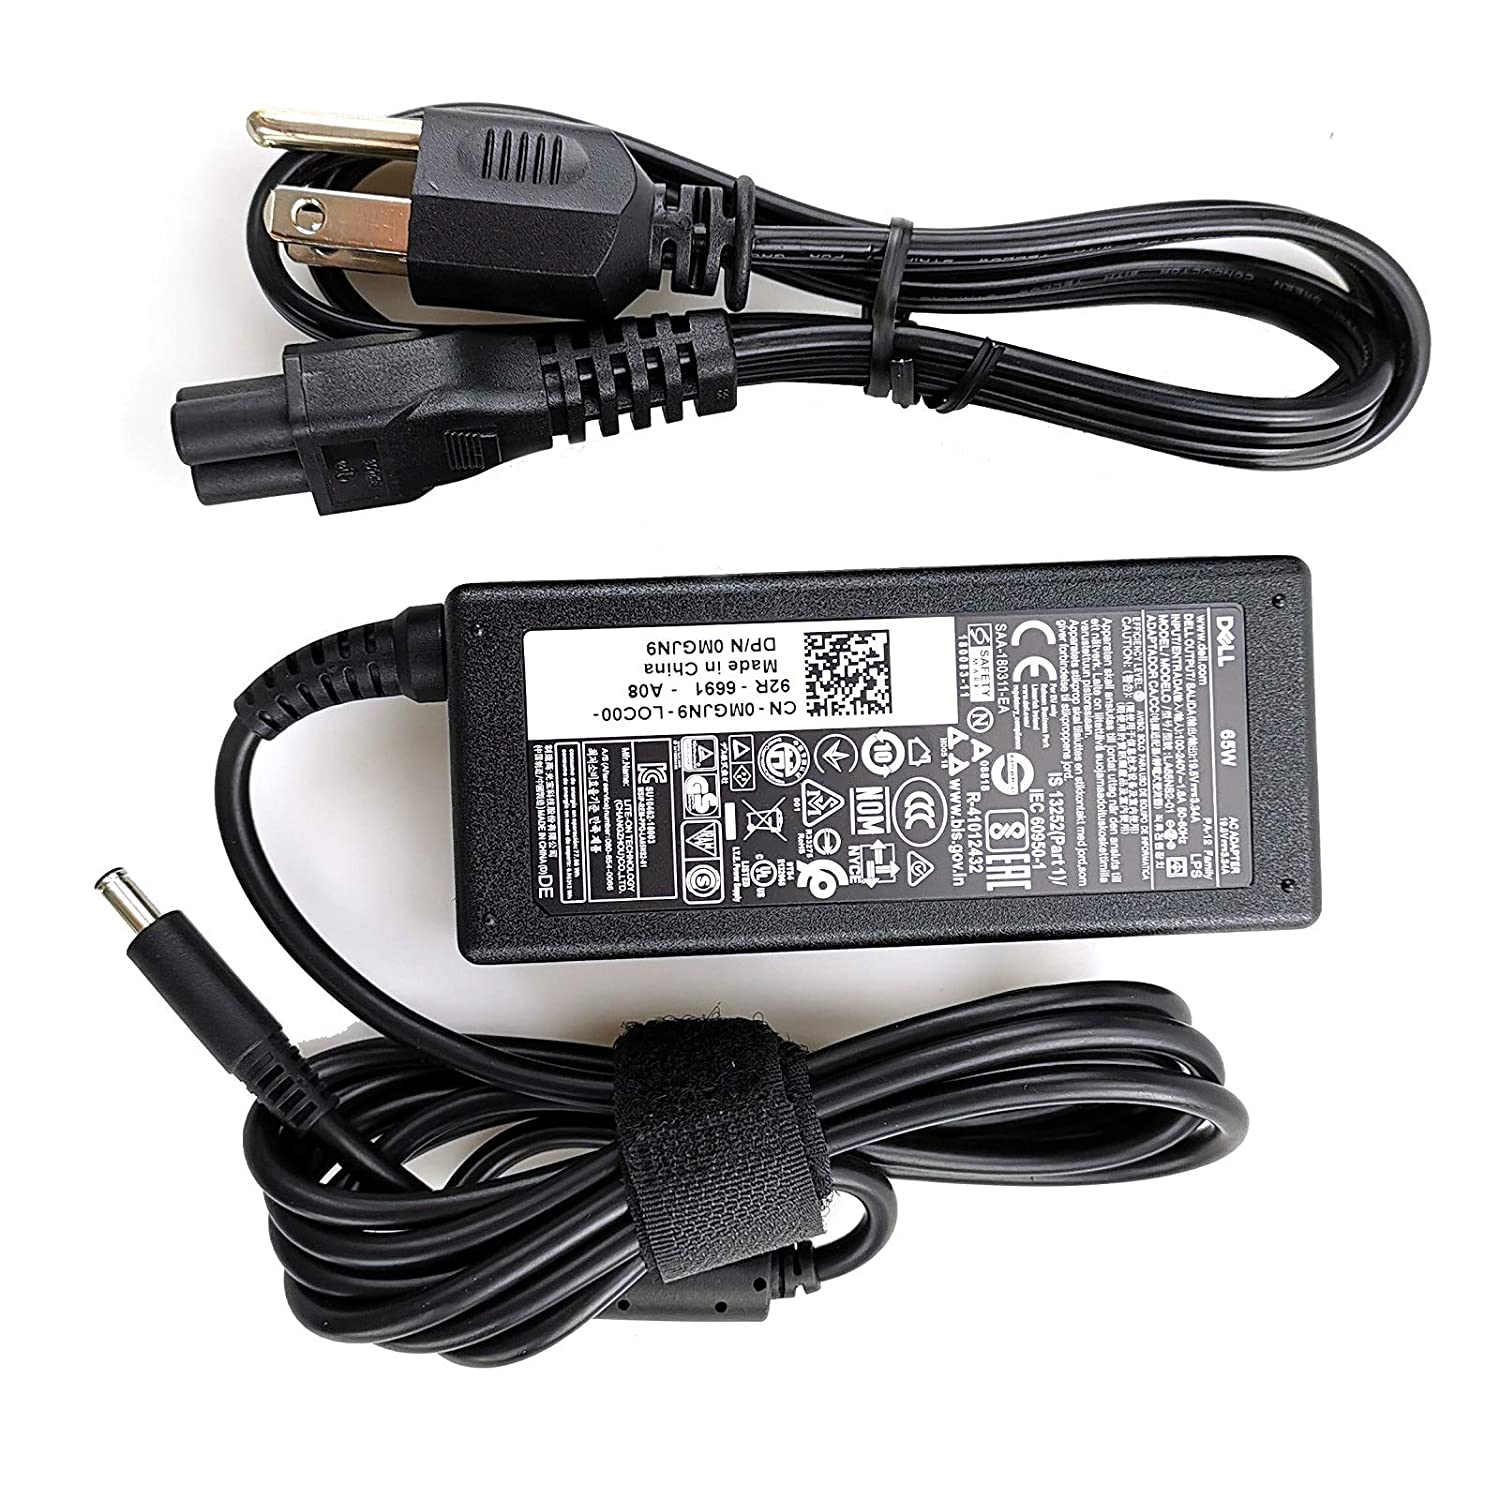 New Dell Original Inspiron Laptop Charger 65W watt 4.5mm tip AC Power Adapter(Power Supply) with Power Cord for Inspiron 13 14 15,3000 5000 7000 Series,5558 5755 3147 7348-2in1 5555 5559,0G6j41 0MGJN - image 1 of 6